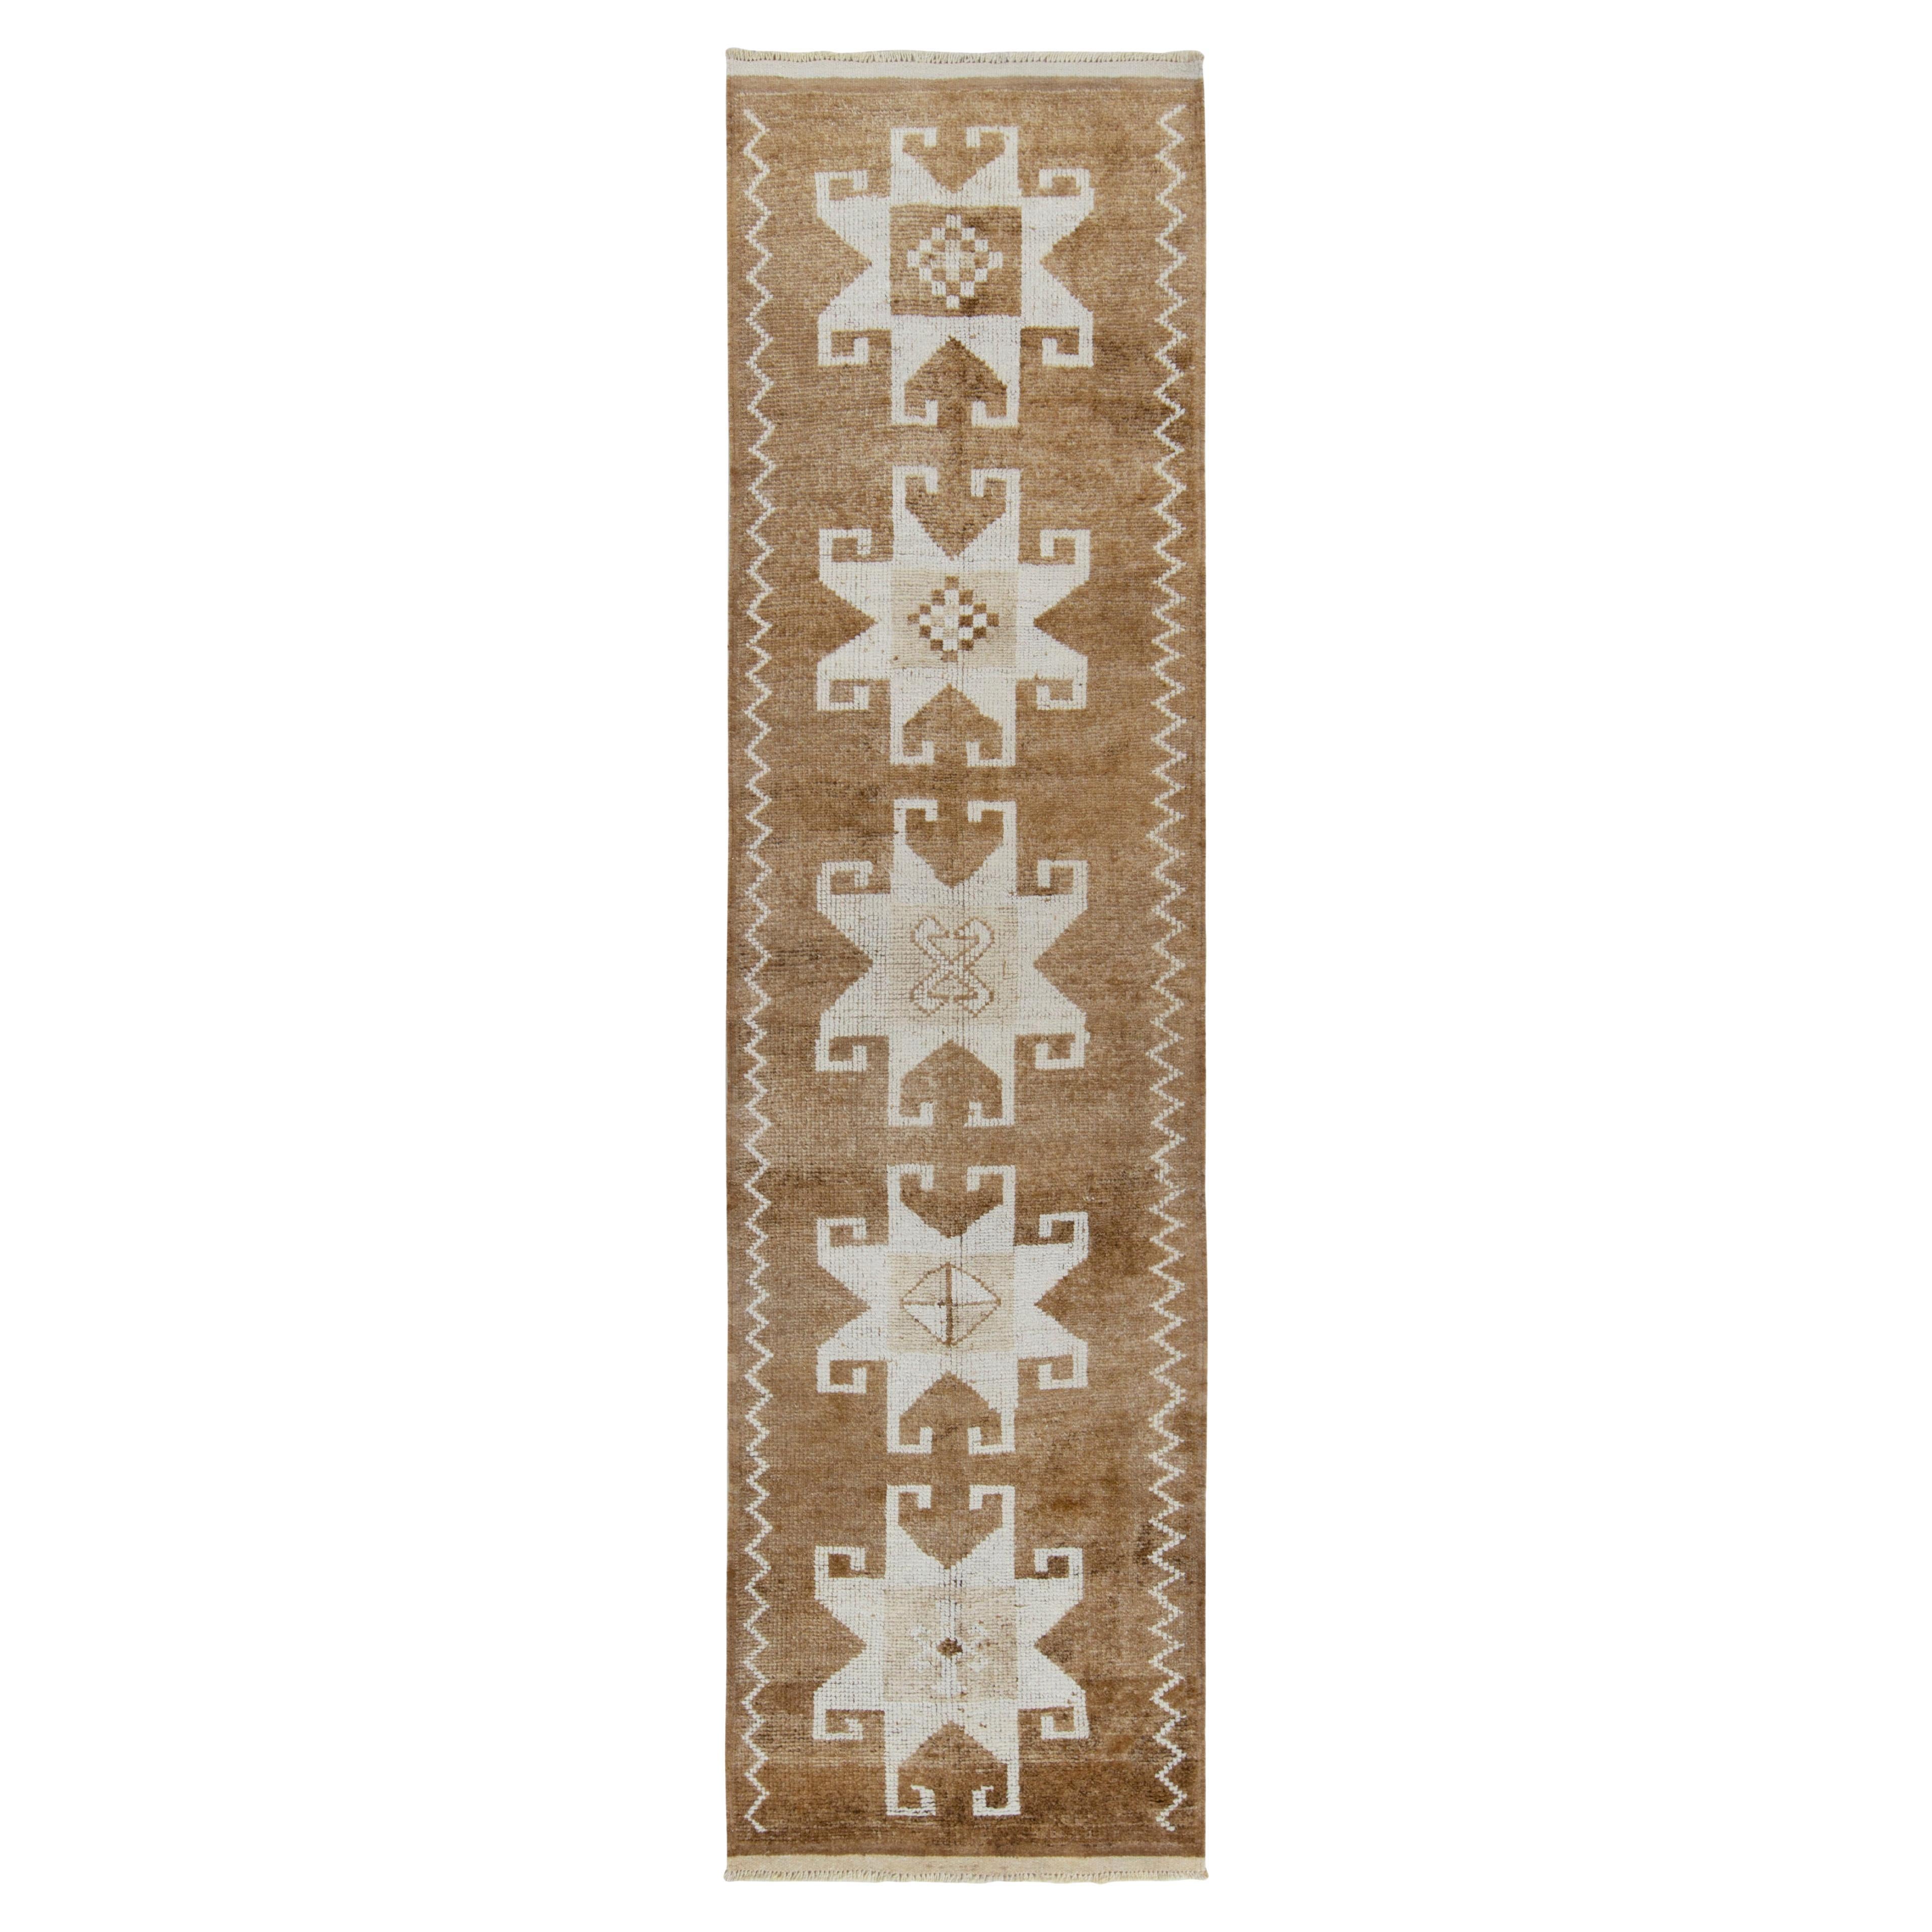 Vintage Tribal Runner in Beige-Brown and White Geometric Patterns by Rug & Kilim For Sale